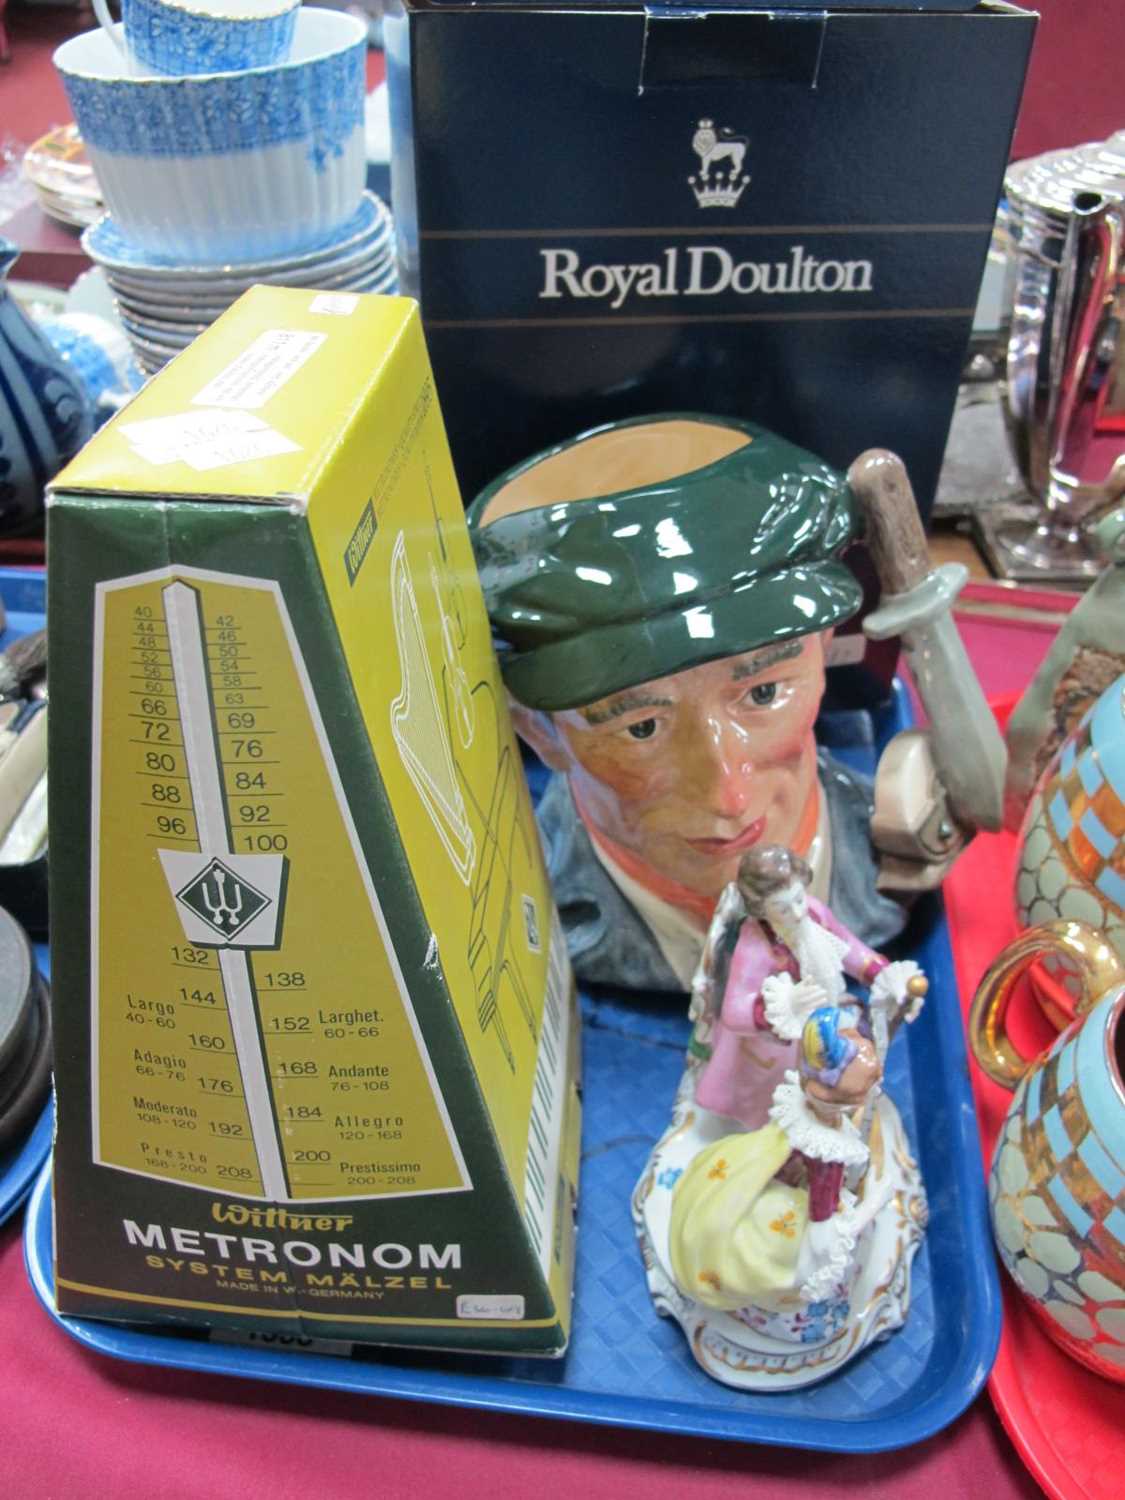 Royal Doulton Little Mester Museum Piece Character Jug, limited edition of 3500 and Wittner